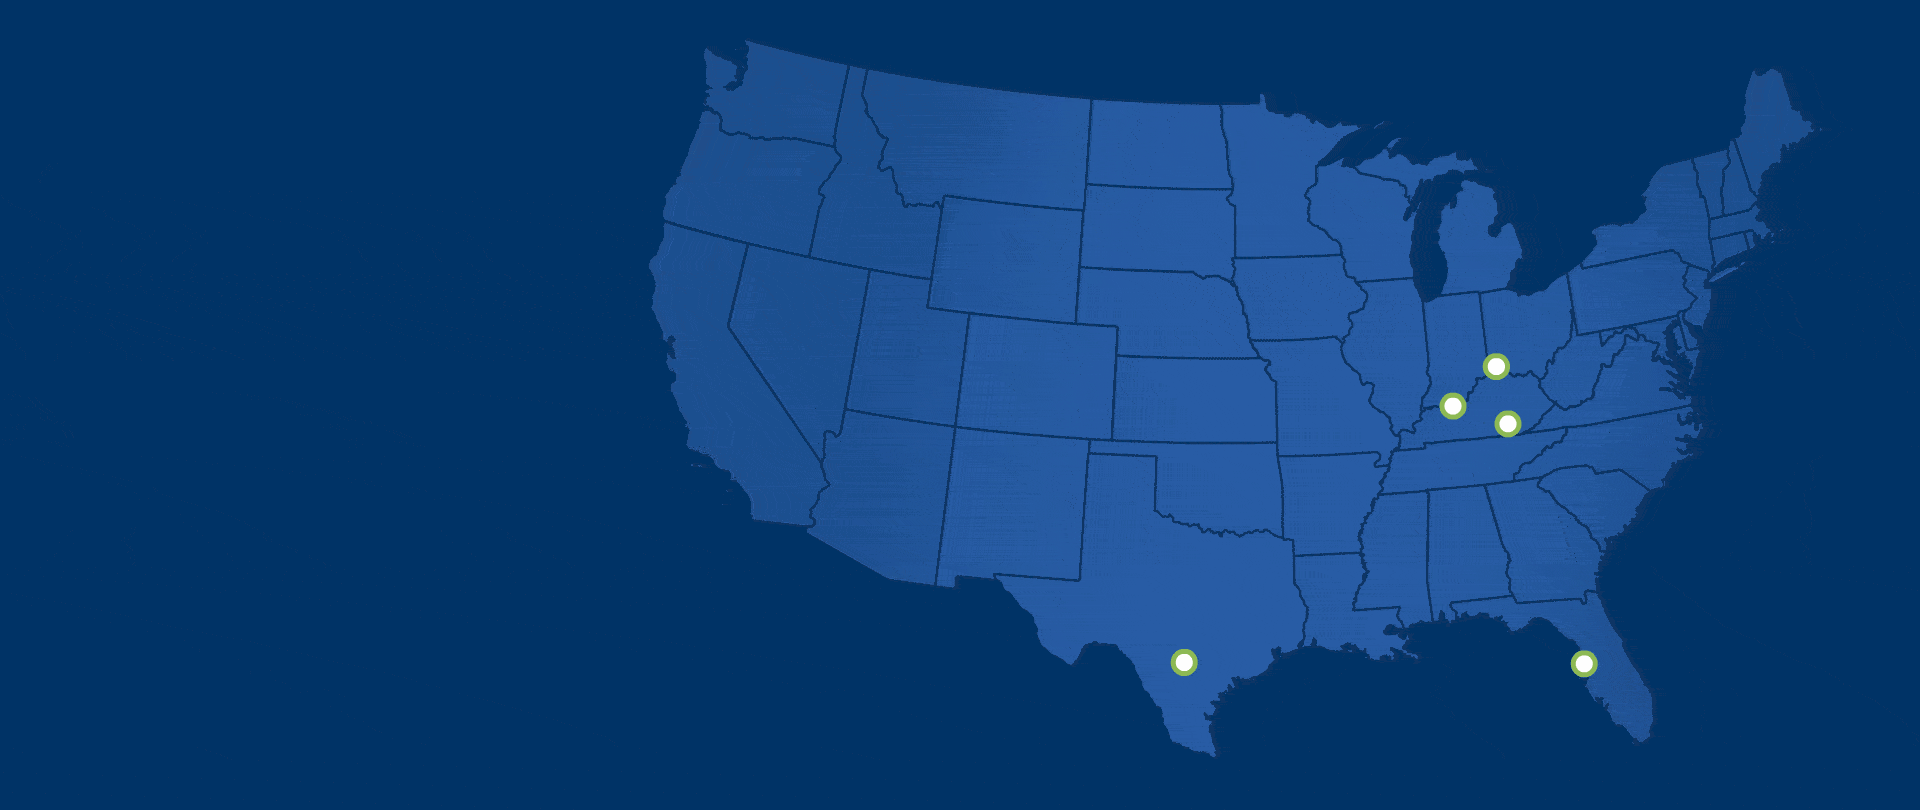 U.S. map with dots animating the 20+ Galen locations across the country.